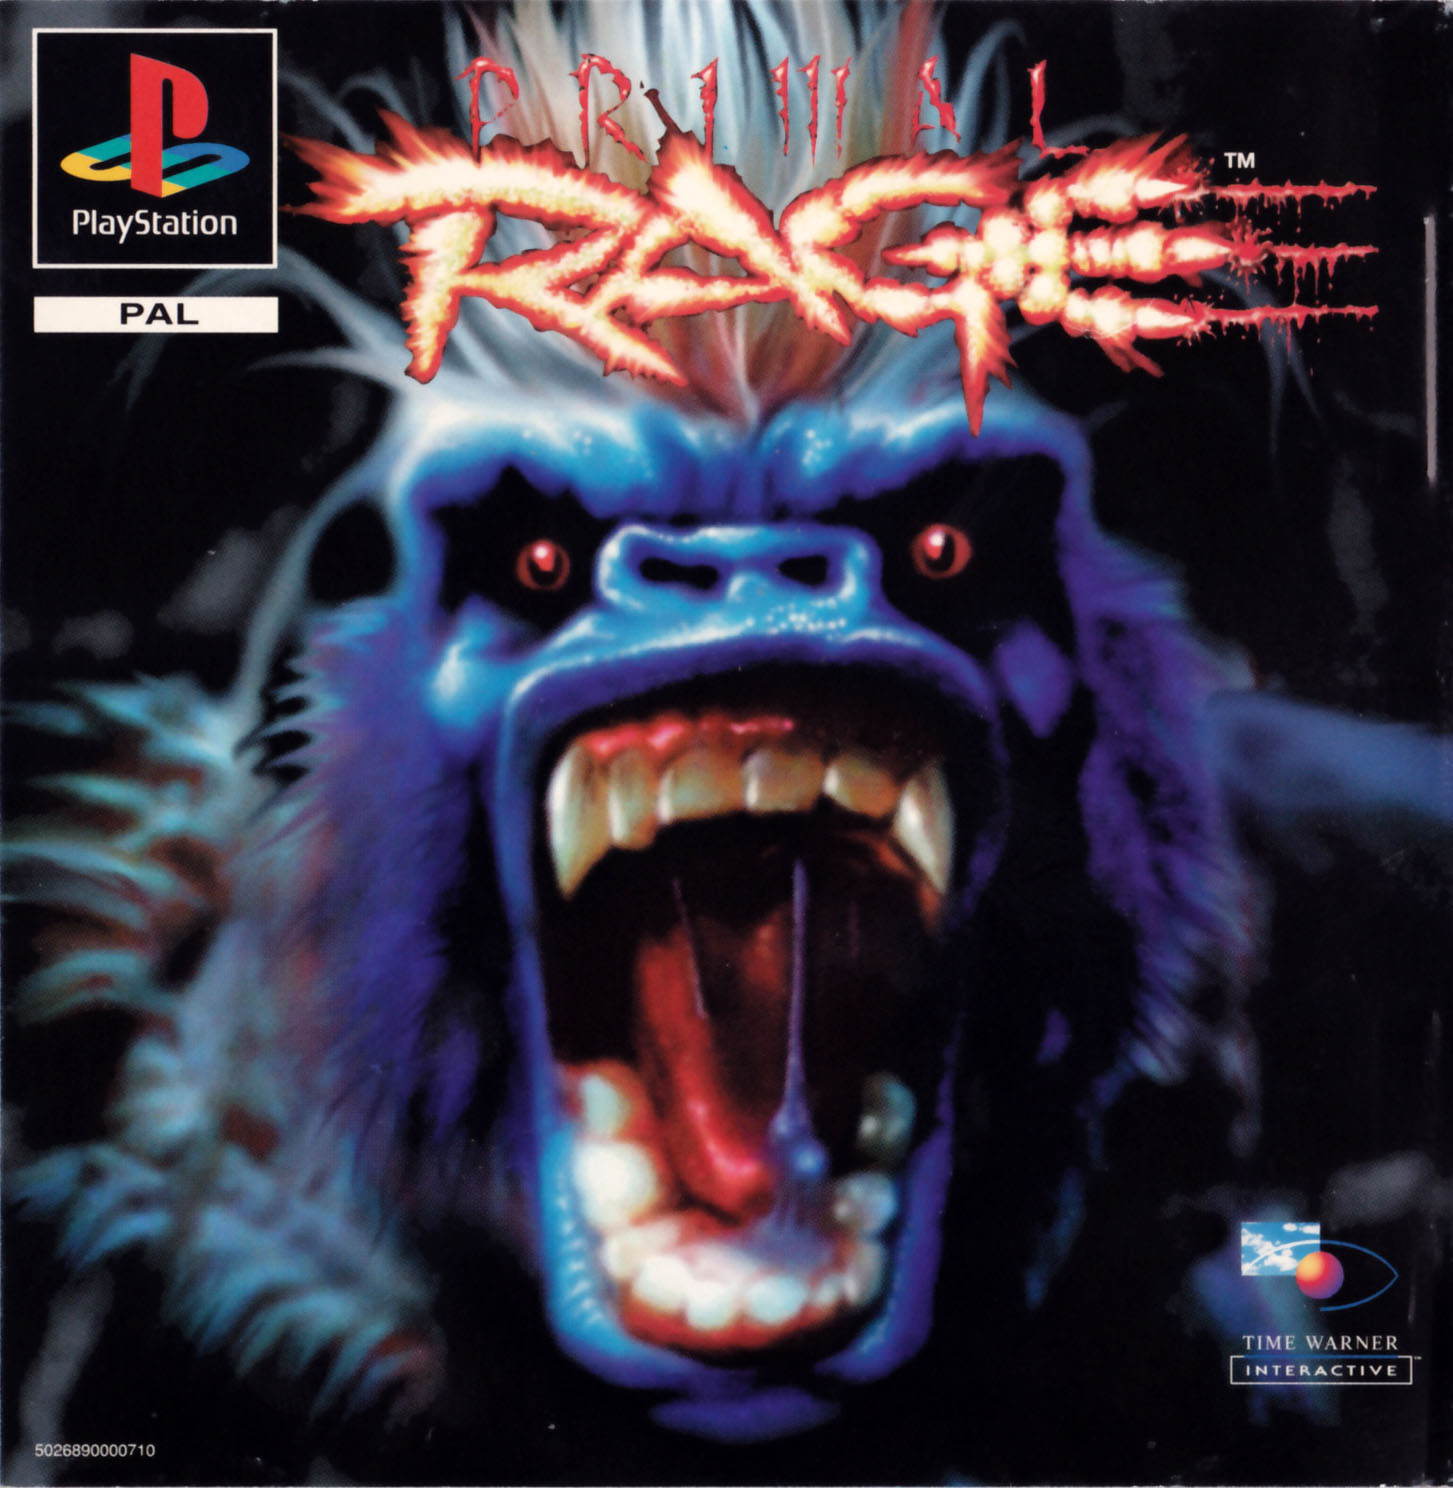 Primal Rage Playstation PAL Cover with Blizzard